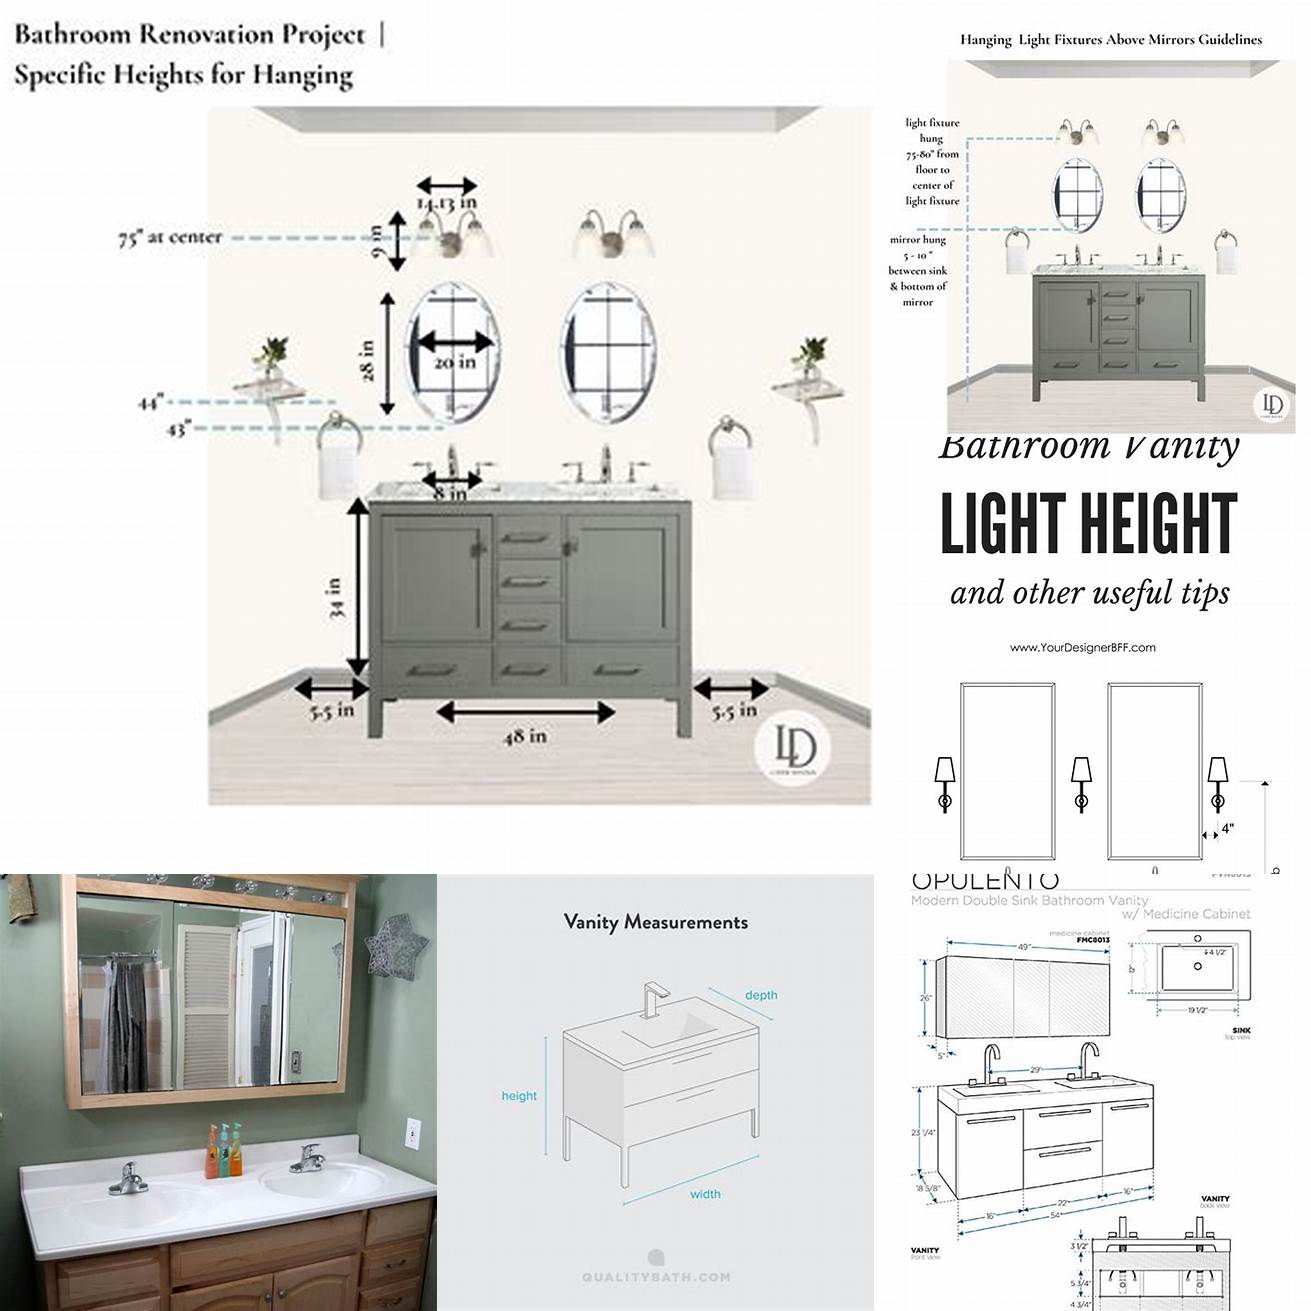 Measure carefully Measure the space where your new vanity will go to ensure that it will fit properly